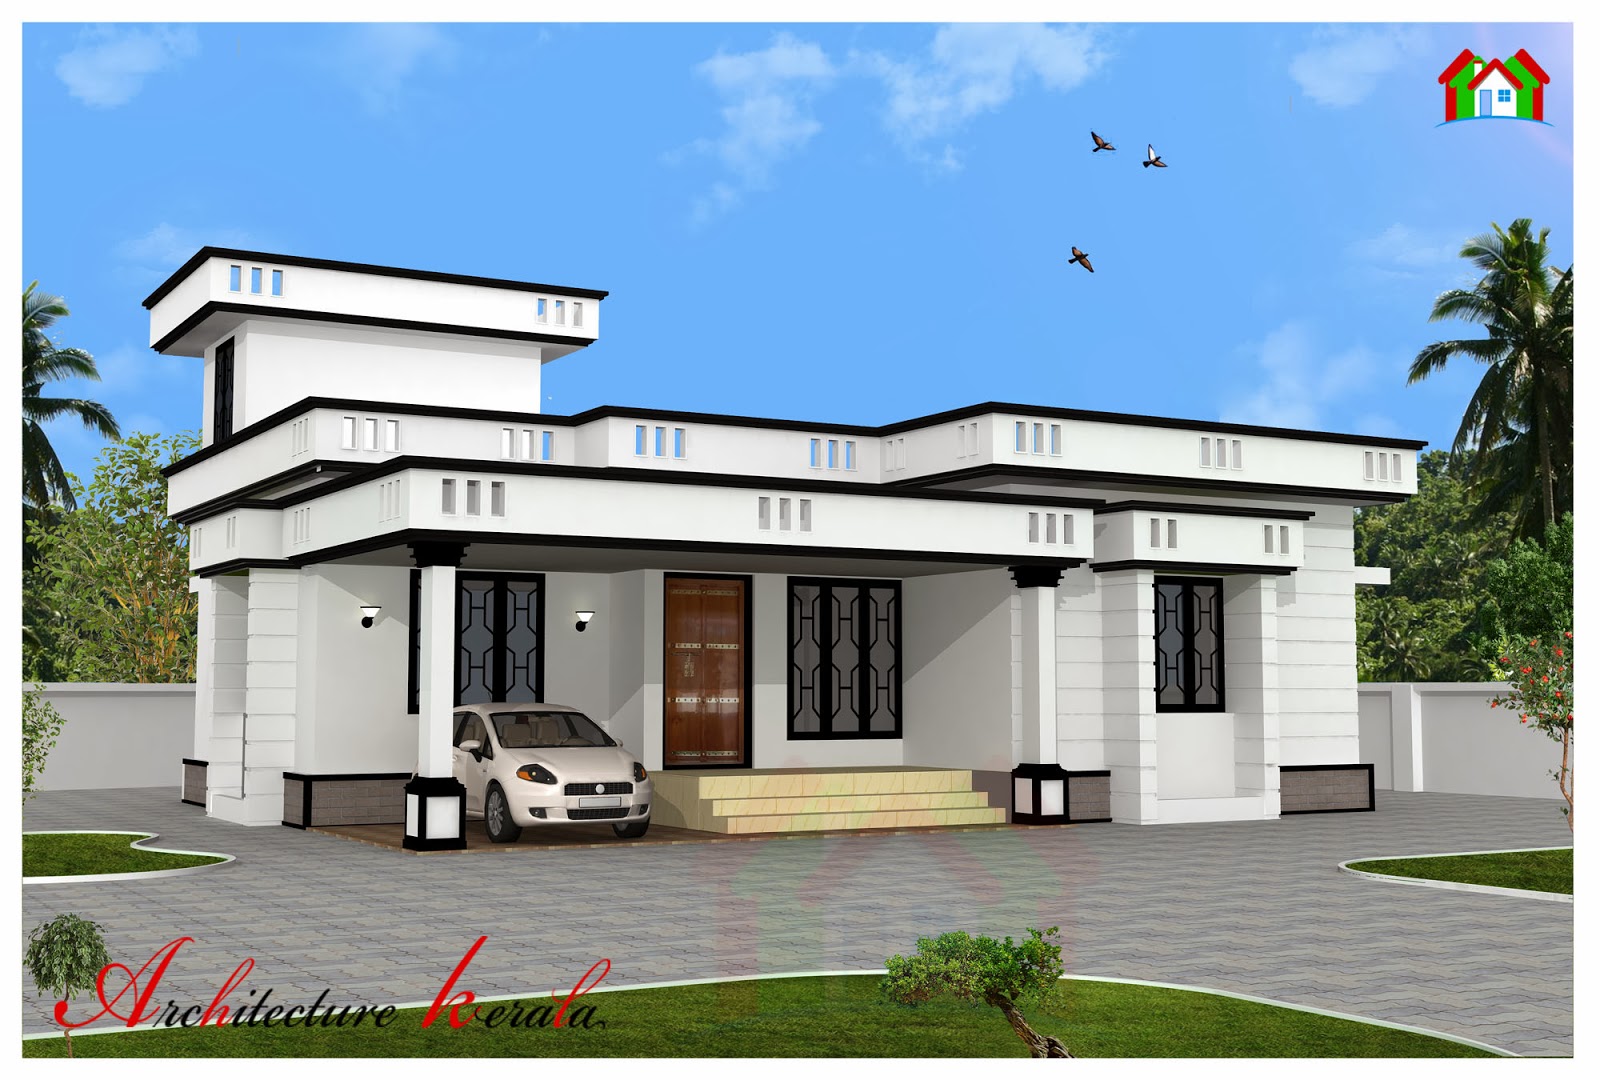 1200 SQUARE FEET TWO BEDROOM HOUSE PLAN AND ELEVATION ...